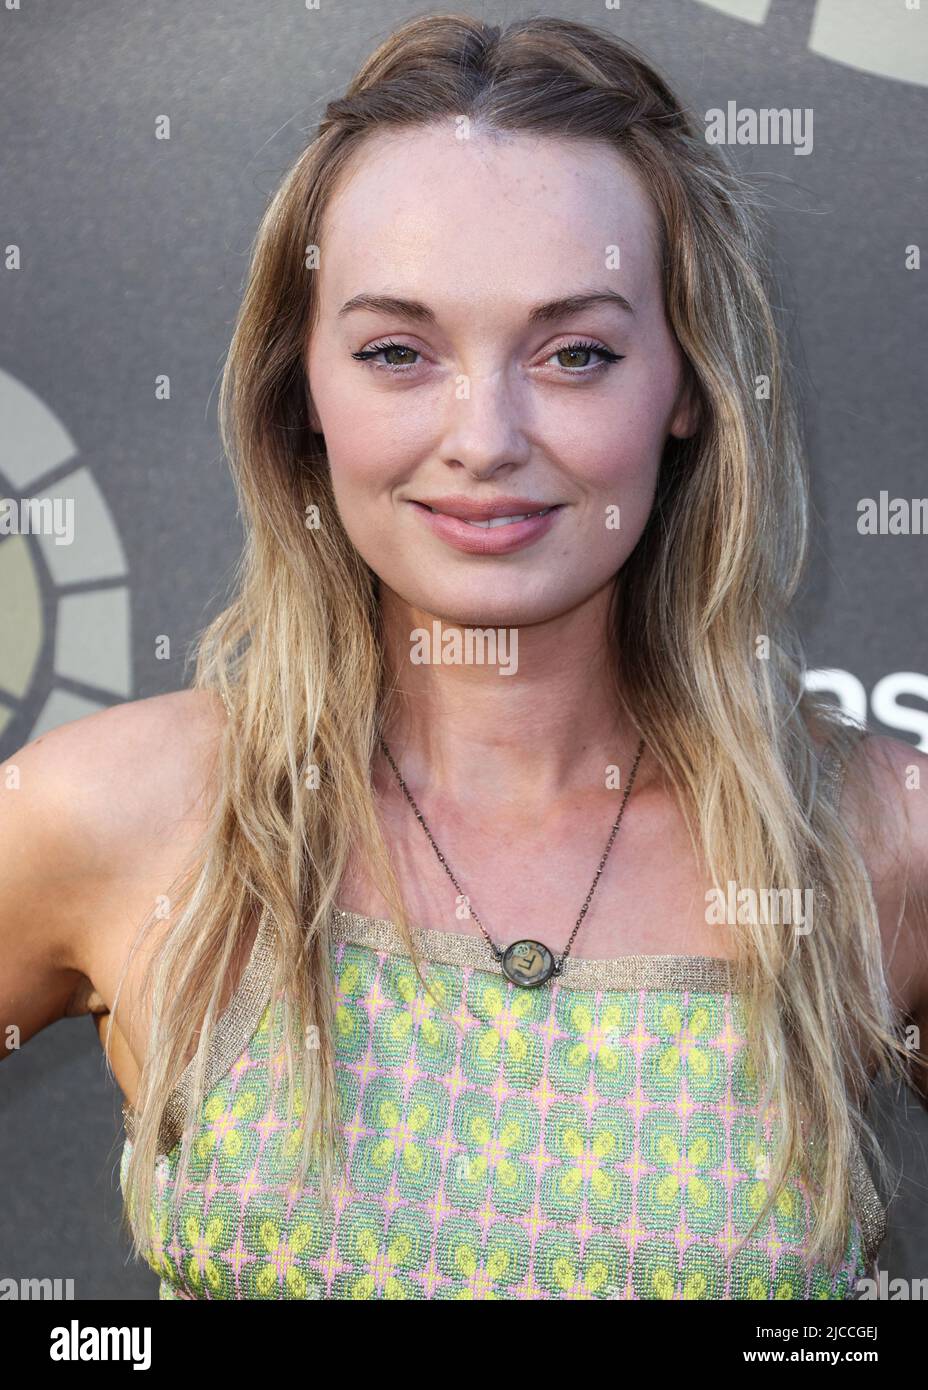 UNIVERSAL CITY, LOS ANGELES, CALIFORNIA, USA - JUNE 11: Irish actress Elva Trill arrives at the Charlize Theron Africa Outreach Project (CTAOP) 2022 Summer Block Party held at Universal Studios Backlot on June 11, 2022 in Universal City, Los Angeles, California, United States. (Photo by Xavier Collin/Image Press Agency) Stock Photo